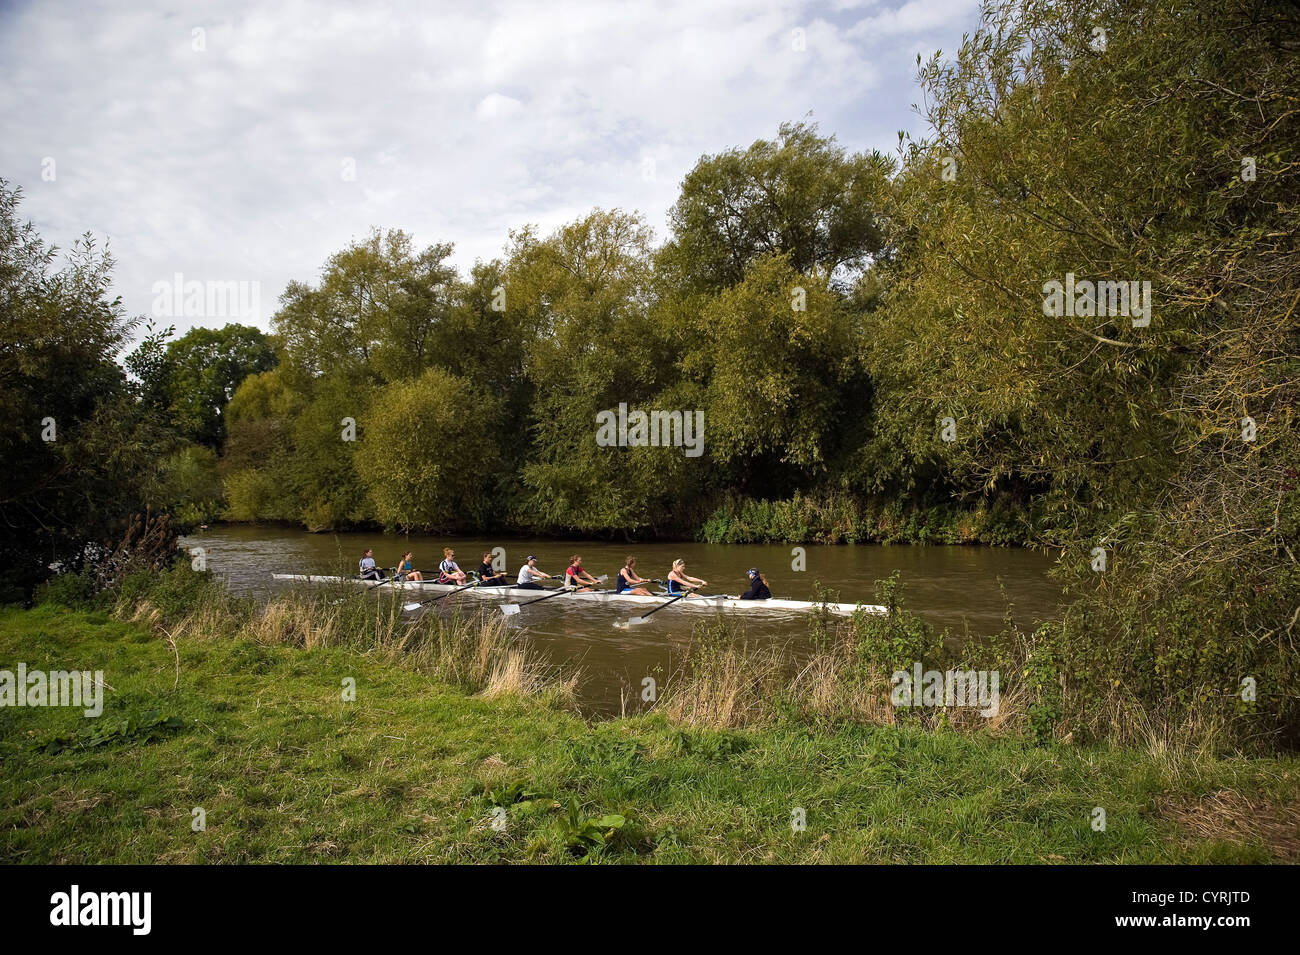 Female members of a rowing club rowing on the River Thames near South Stoke, Oxfordshire, UK Stock Photo